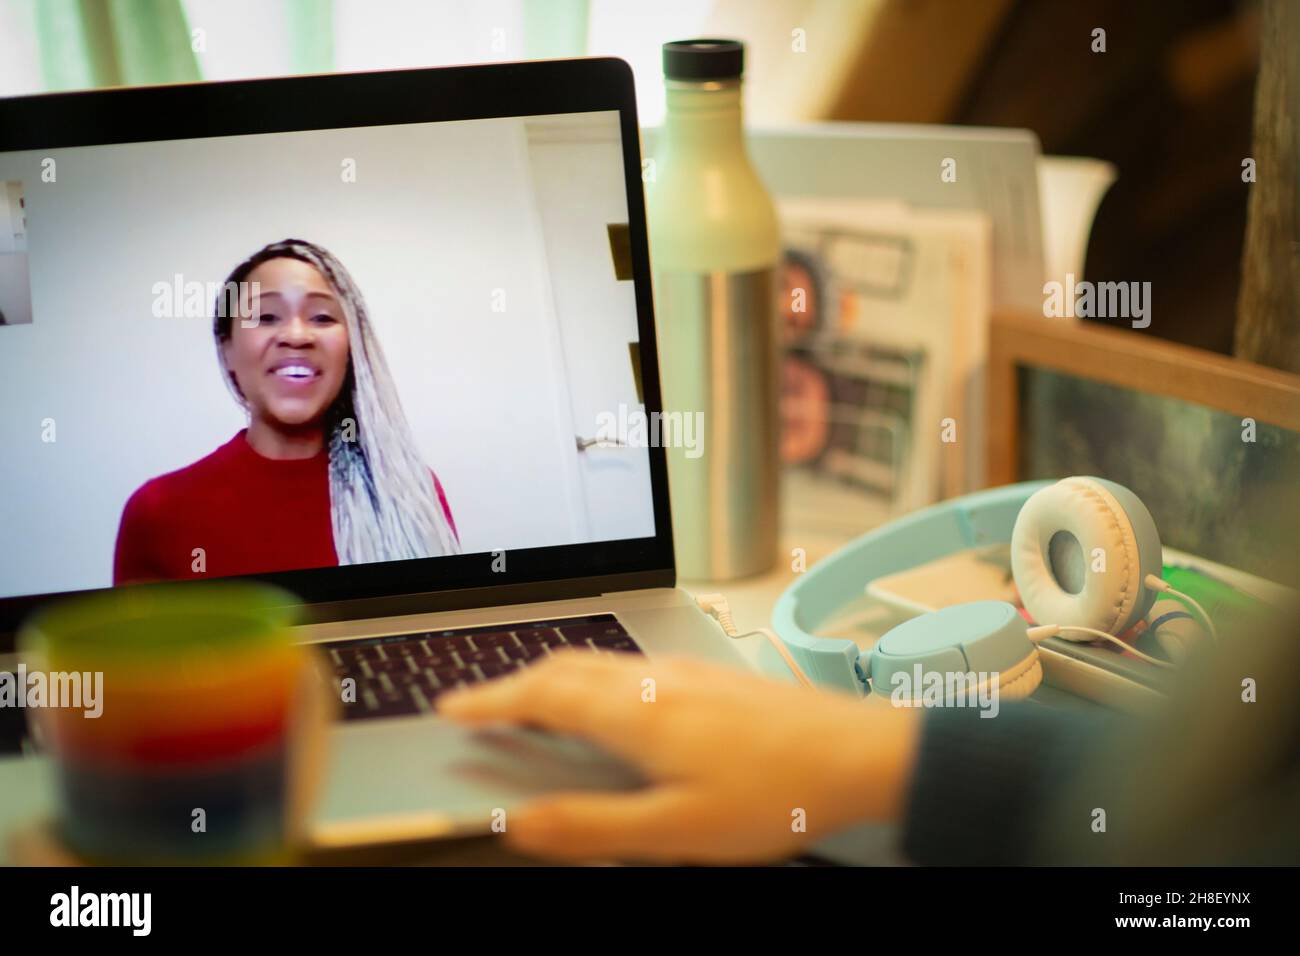 Smiling businesswoman on laptop screen video chatting with colleague Stock Photo